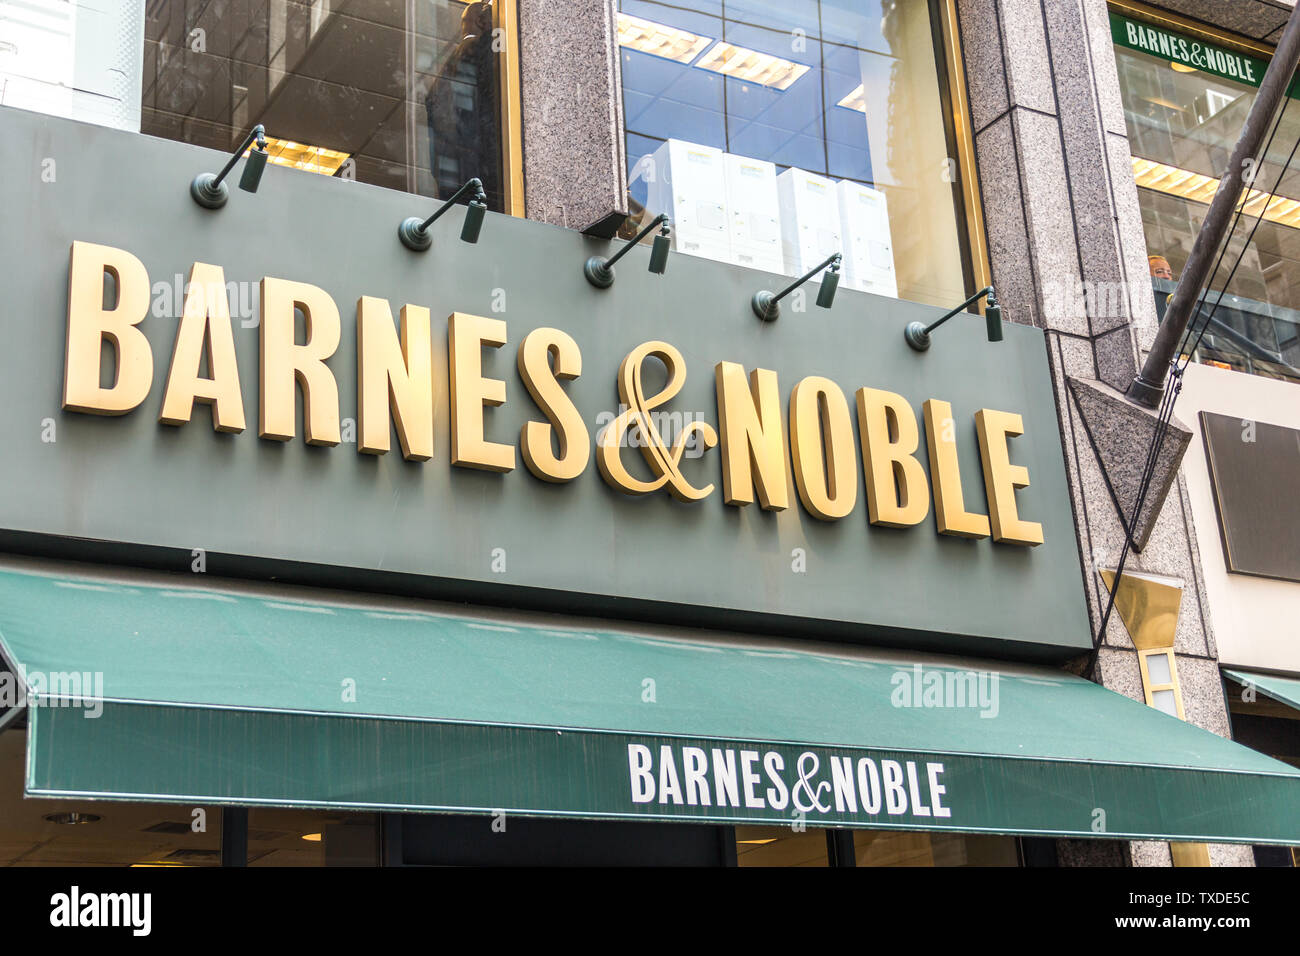 NEW YORK, USA - 17 MAY, 2019: Barnes and Noble Bookstore sign in New York USA. bookseller with the largest number of retail outlets in the United Stock Photo